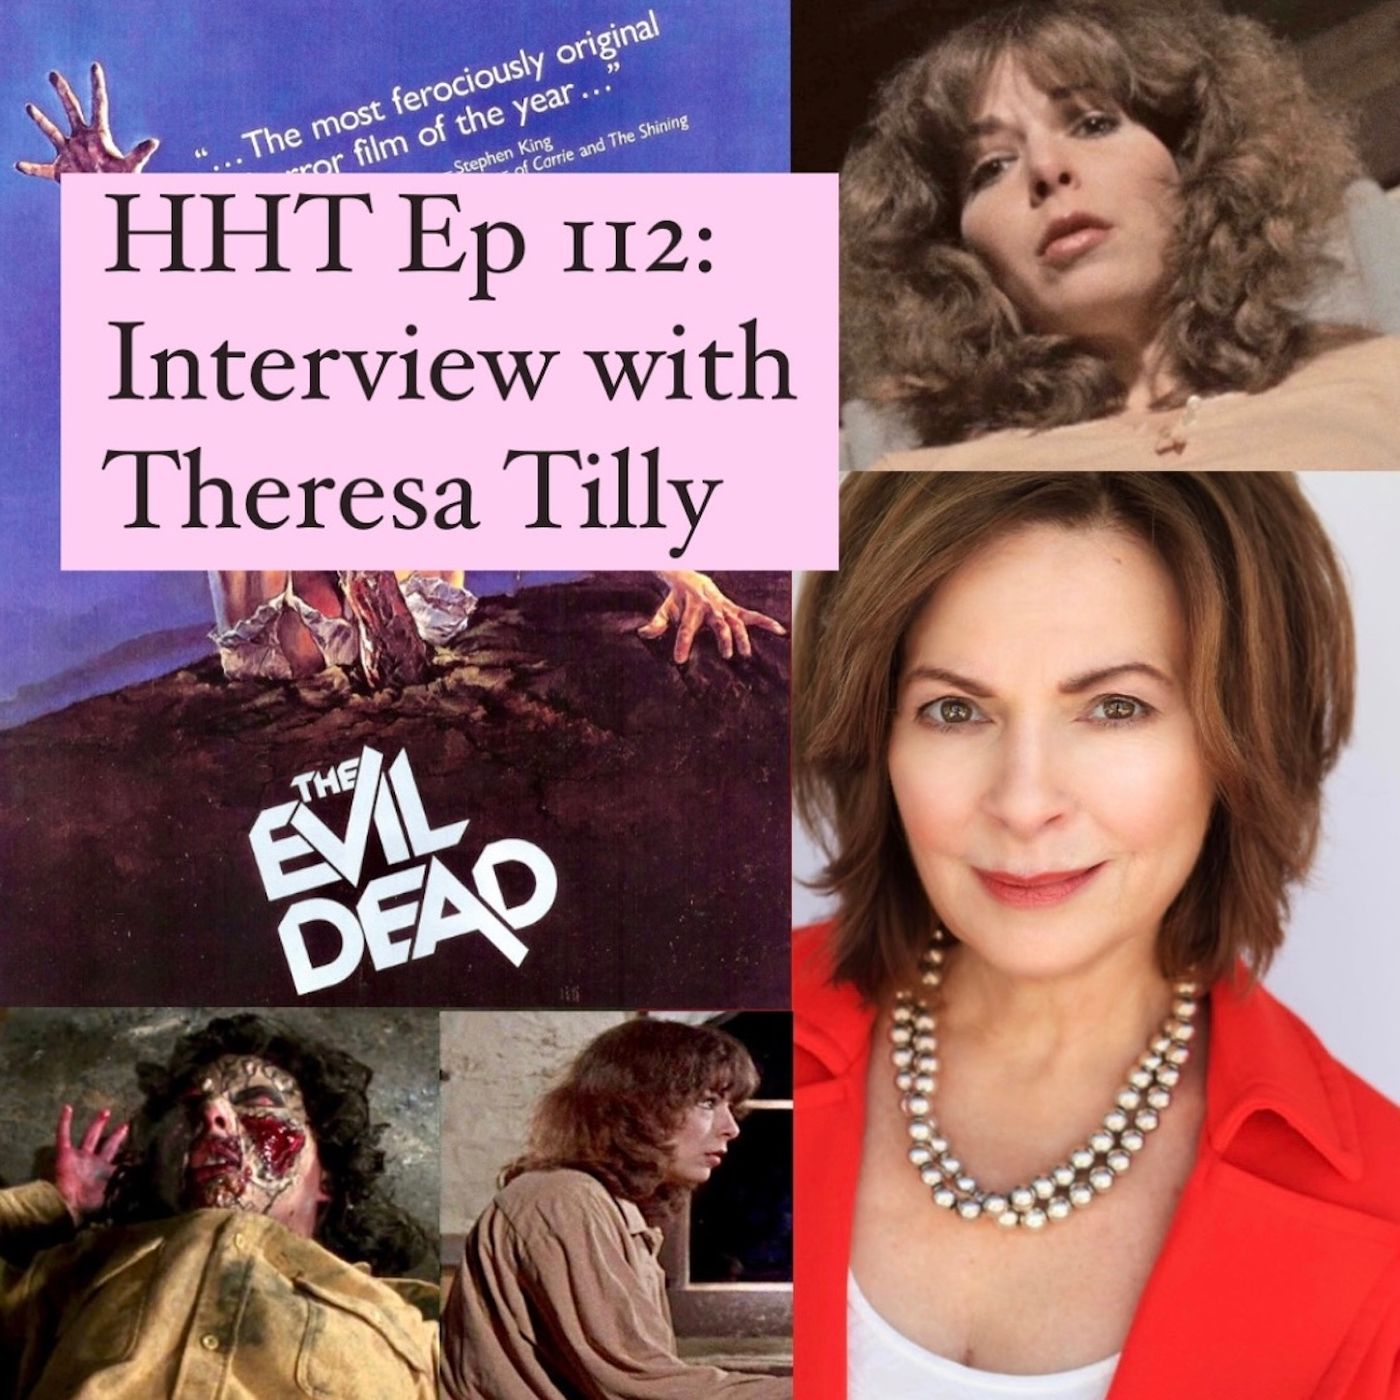 Ep 112: Interview w/Theresa Tilly from "The Evil Dead" Image